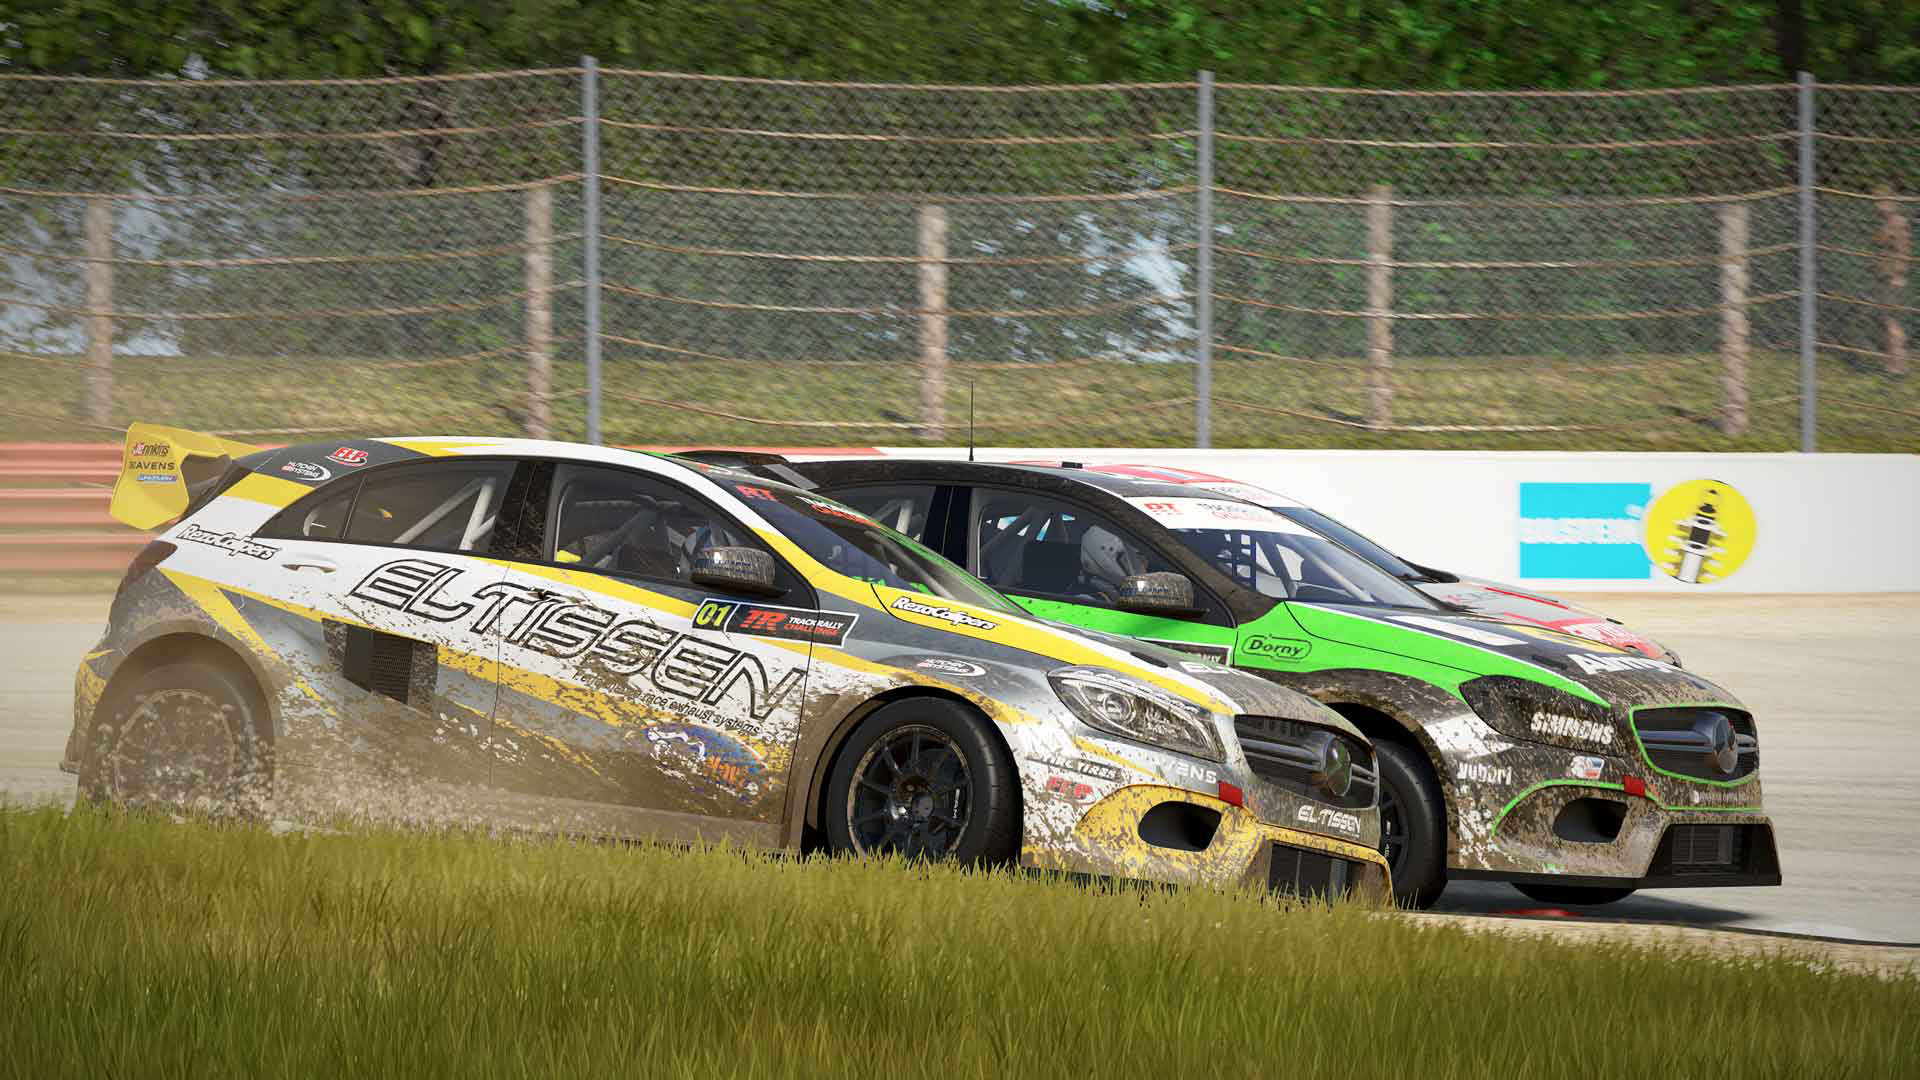 download project cars 2 steam for free